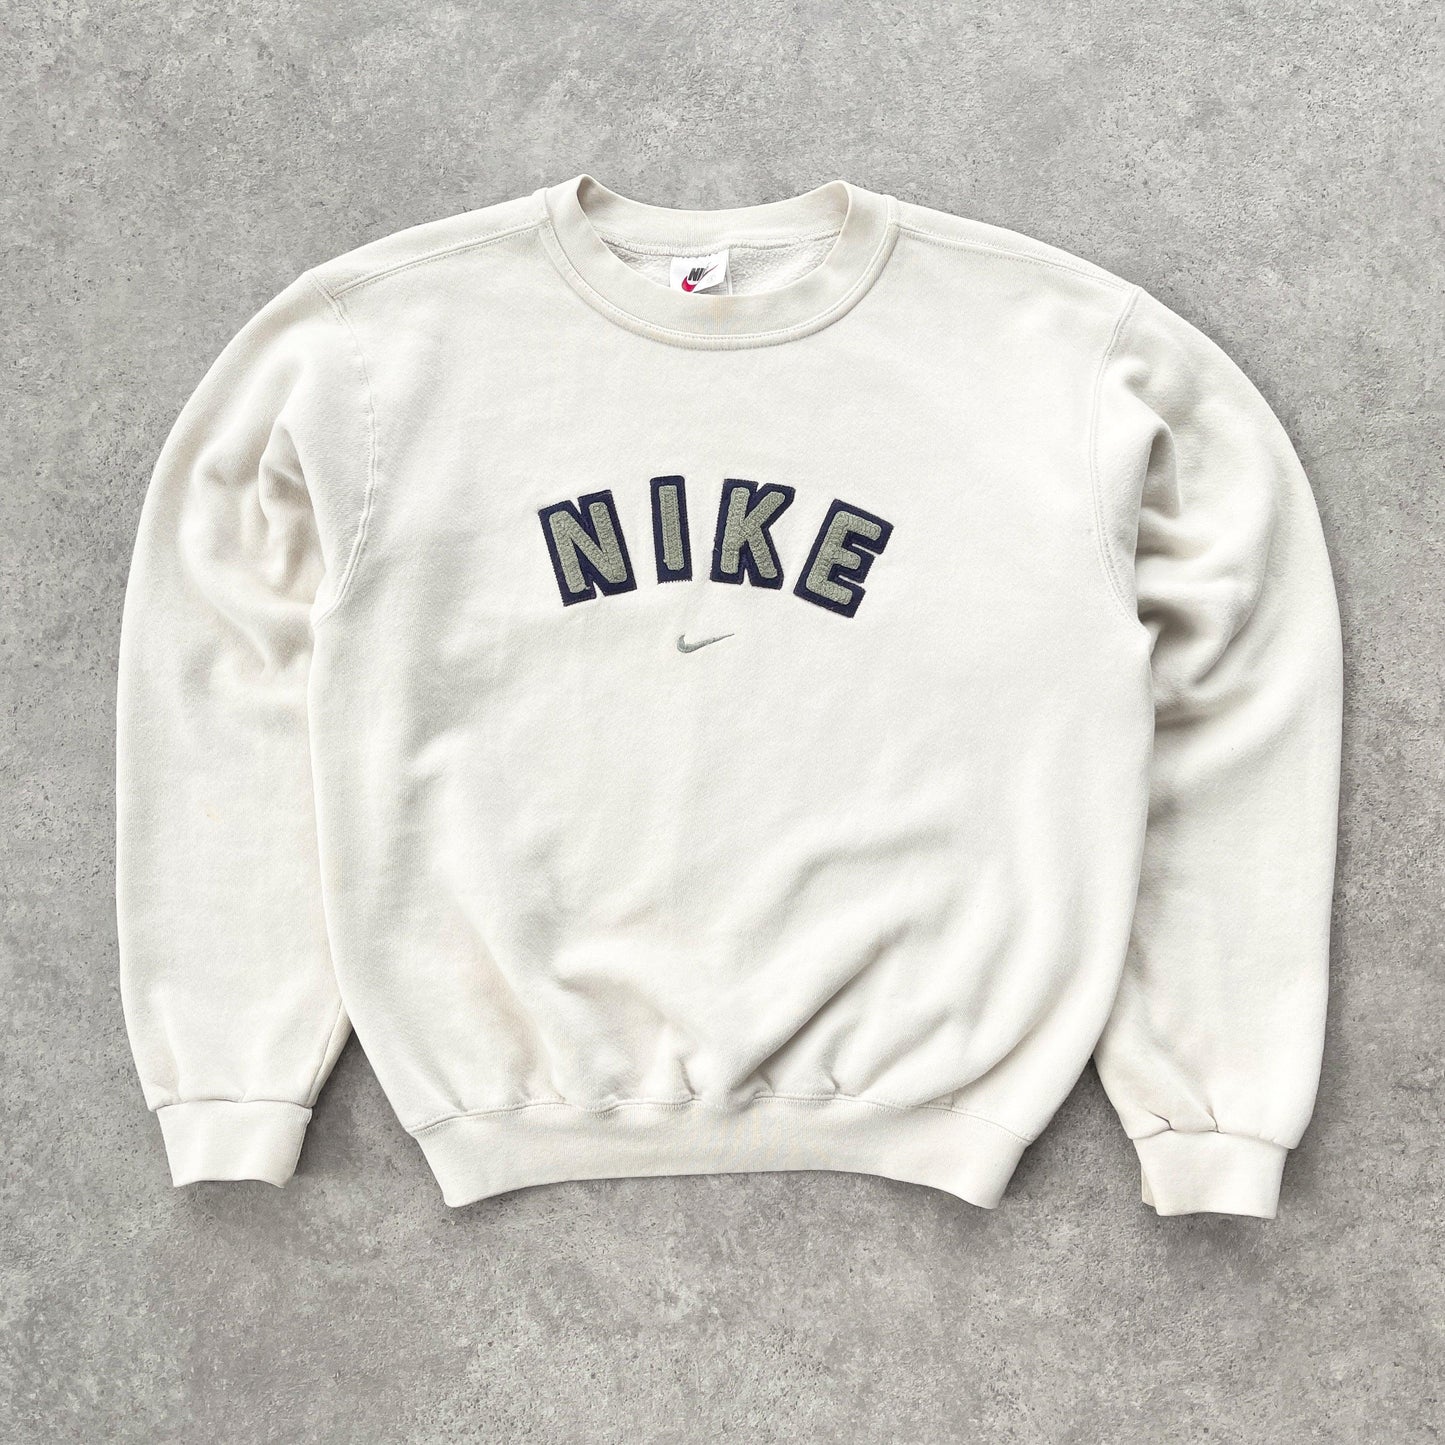 Nike RARE 1990s heavyweight embroidered spellout sweatshirt (S) - Known Source